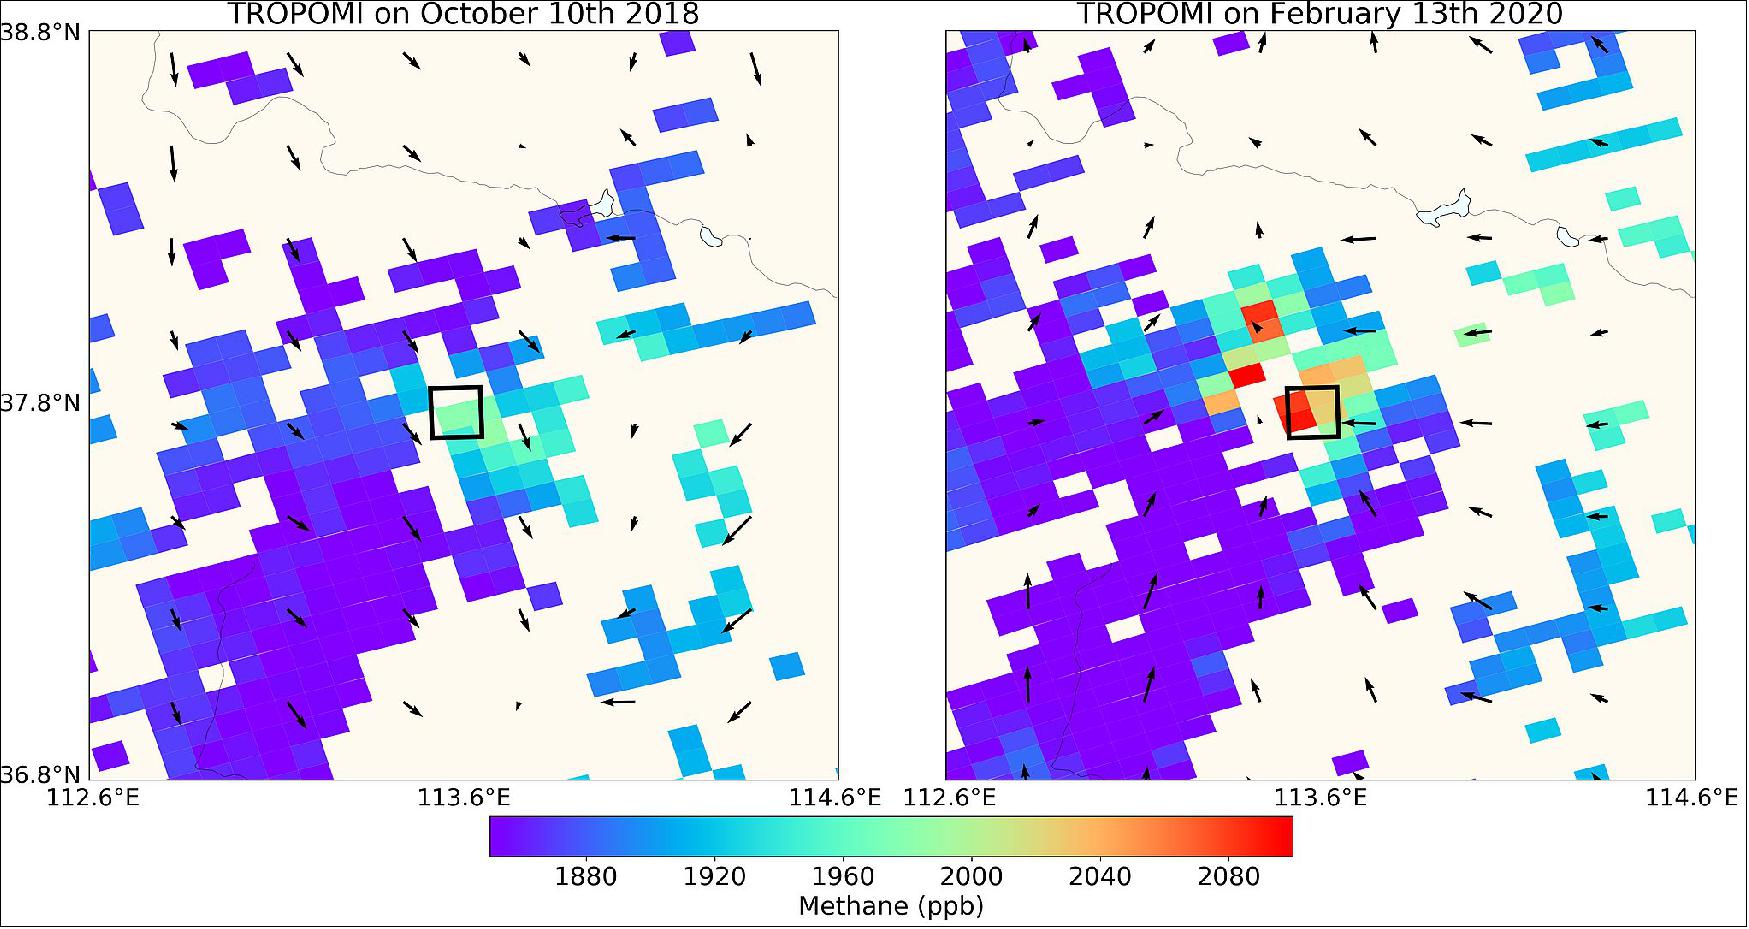 Figure 64: TROPOMI methane measurements over a coal mine in the Shanxi province, China. GHGSat have worked in close collaboration with the Sentinel-5P team at SRON Netherlands Institute for Space Research to investigate hotspots of methane emissions. The team uses data from the Copernicus Sentinel-5P satellite to detect emissions on a global scale, and then utilizes data from GHGSat satellites to quantify and attribute emission to specific facilities around the world. -This has led to several new hotspots being discovered including a coal mine in the Shanxi province, China (image credit: ESA, the image contains modified Copernicus Sentinel data (2018, 2020), processed by SRON)